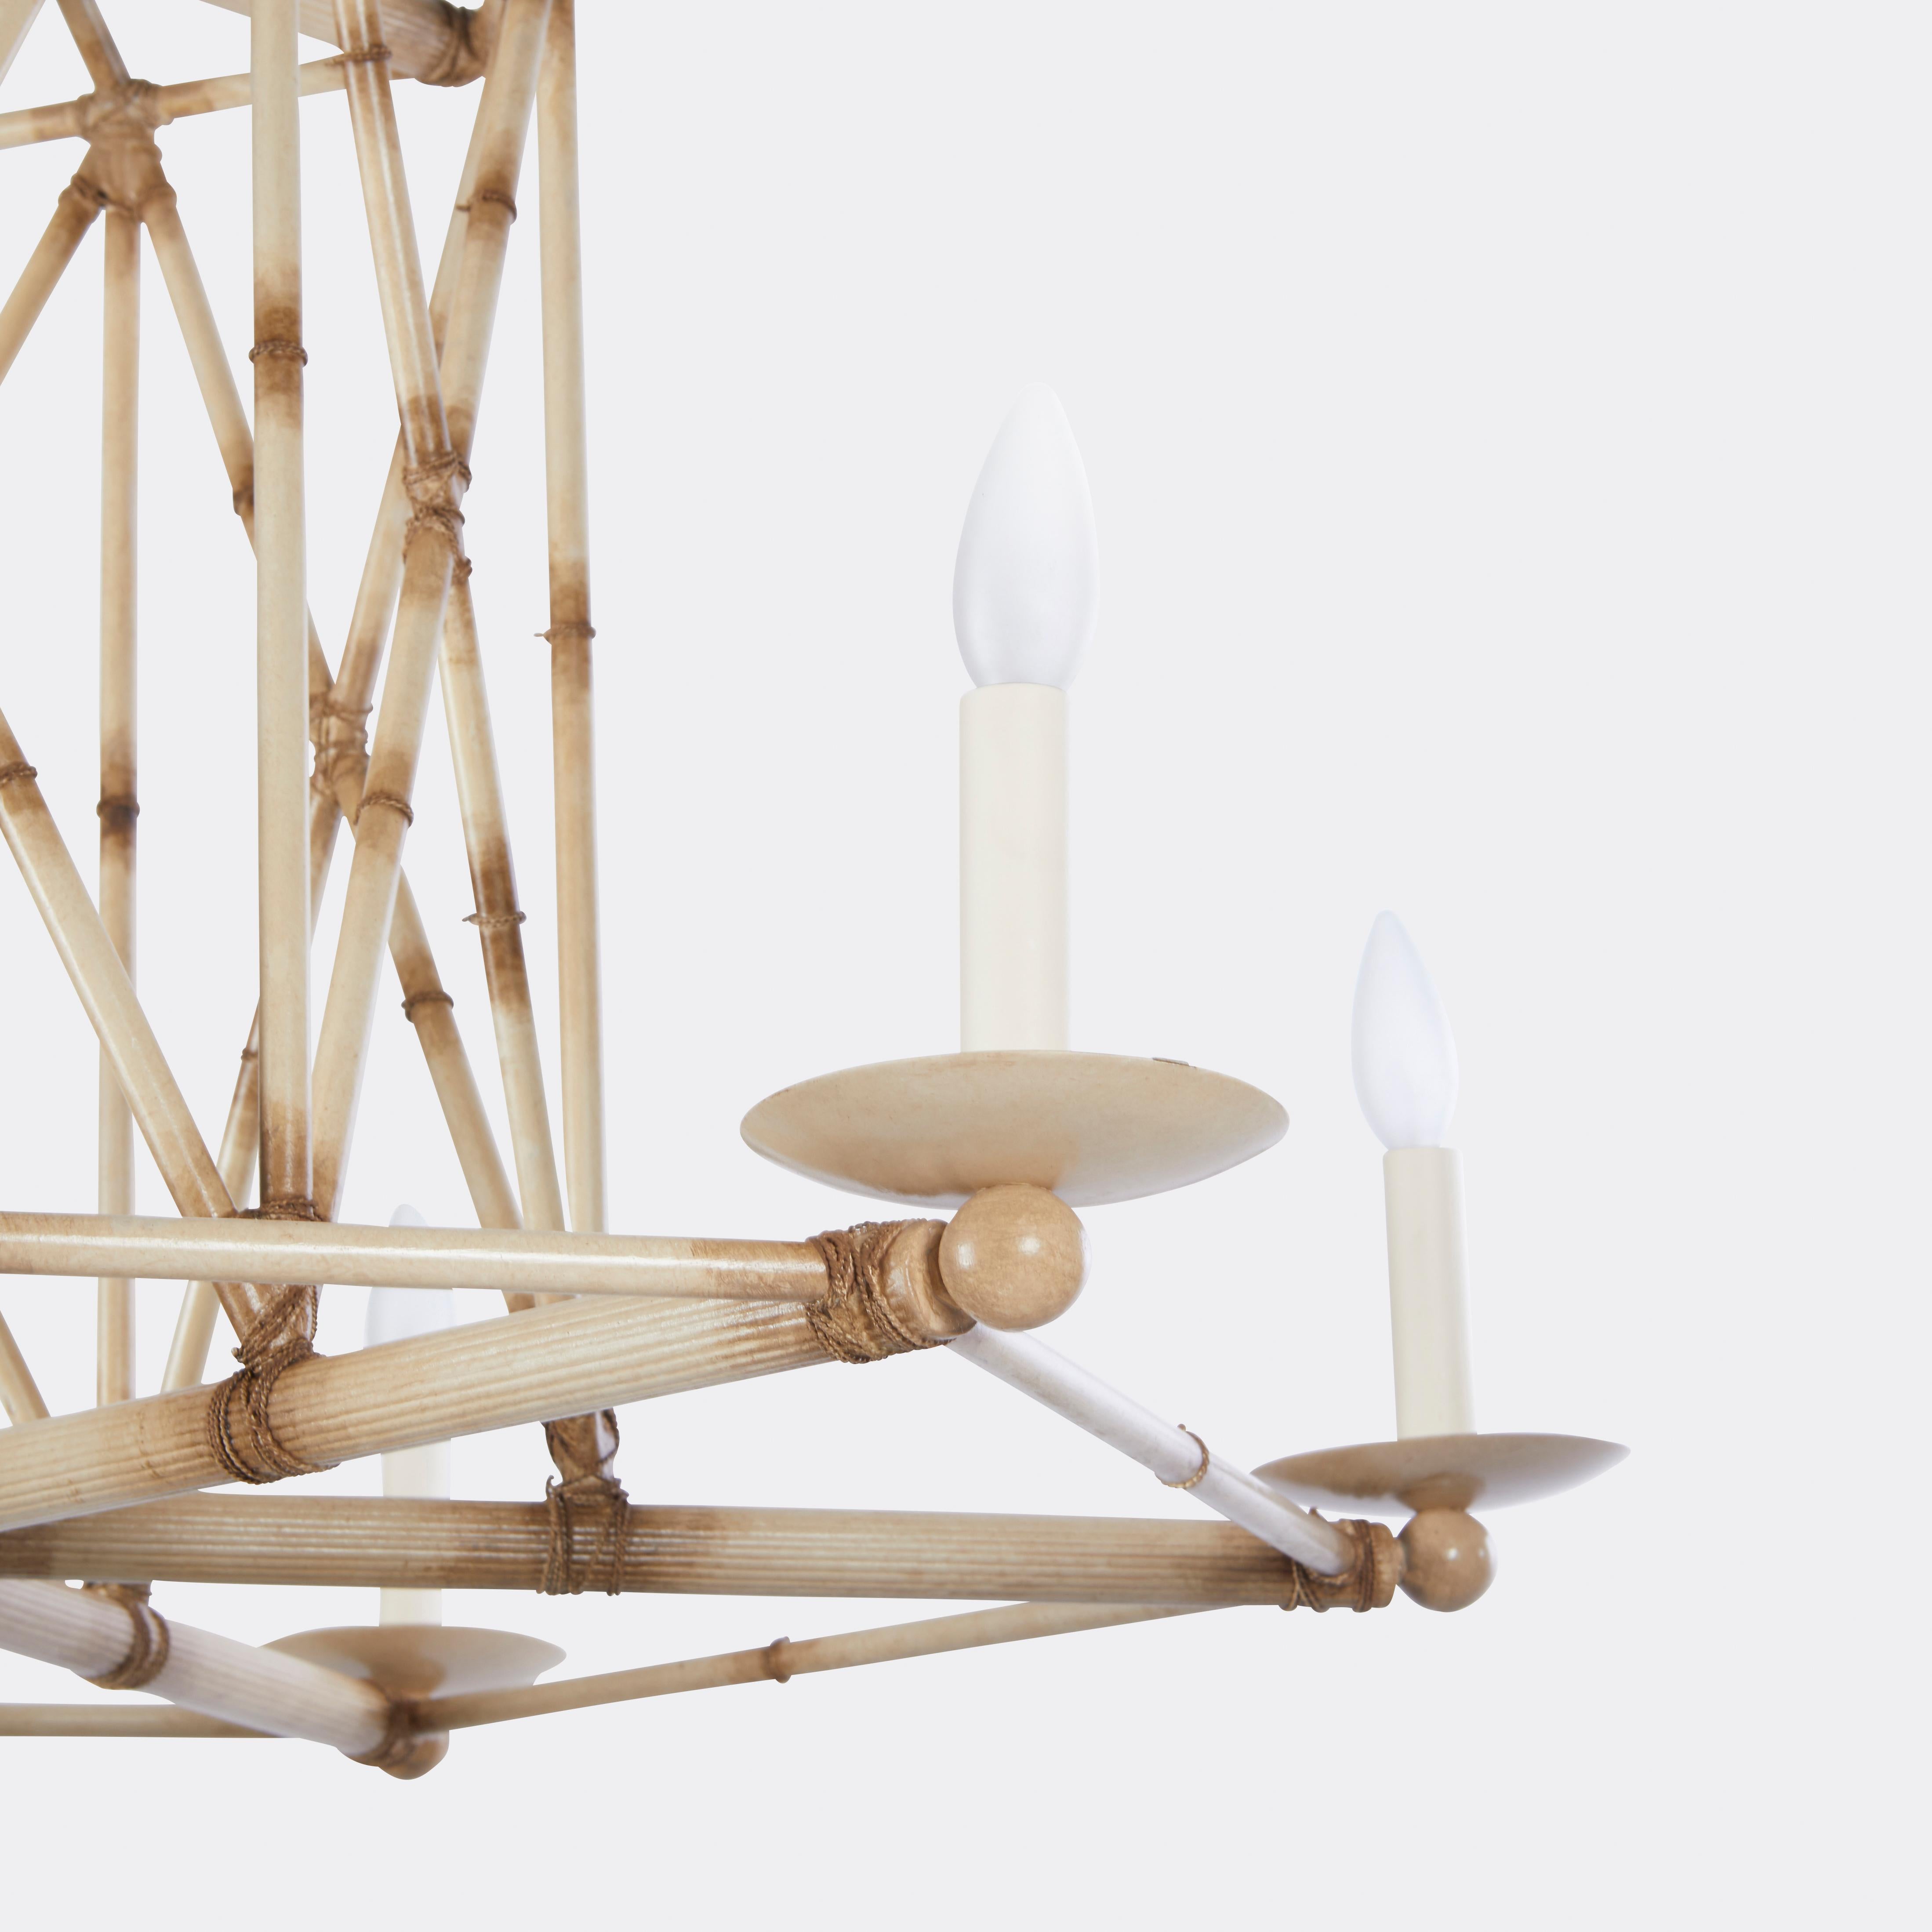 A six light faux bamboo chandelier, by David Duncan Lighting. This chandelier features a playfully intricate geometric structure, formed by crossbanded sections of hand painted brass. These hand painted details are also used to create a scorched